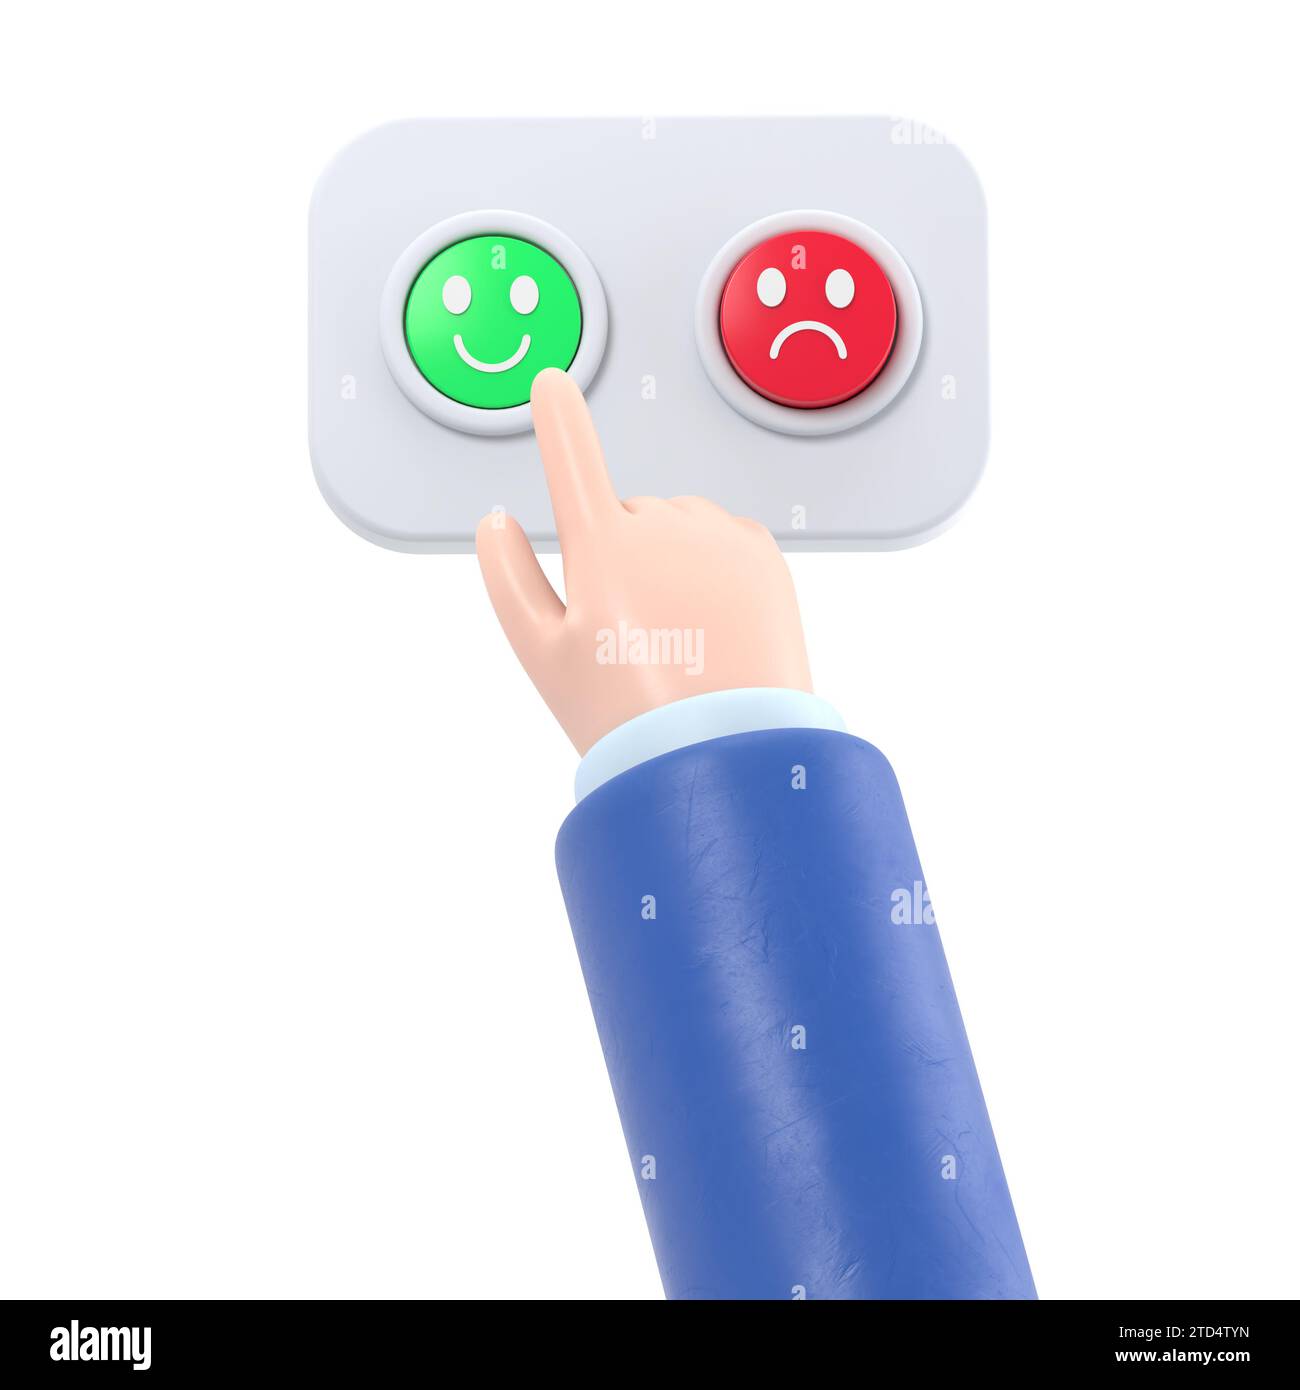 Satisfied customer cartoon hand presses the green button. Business or market clip art. Positive experience emotion.3D rendering on white background. Stock Photo